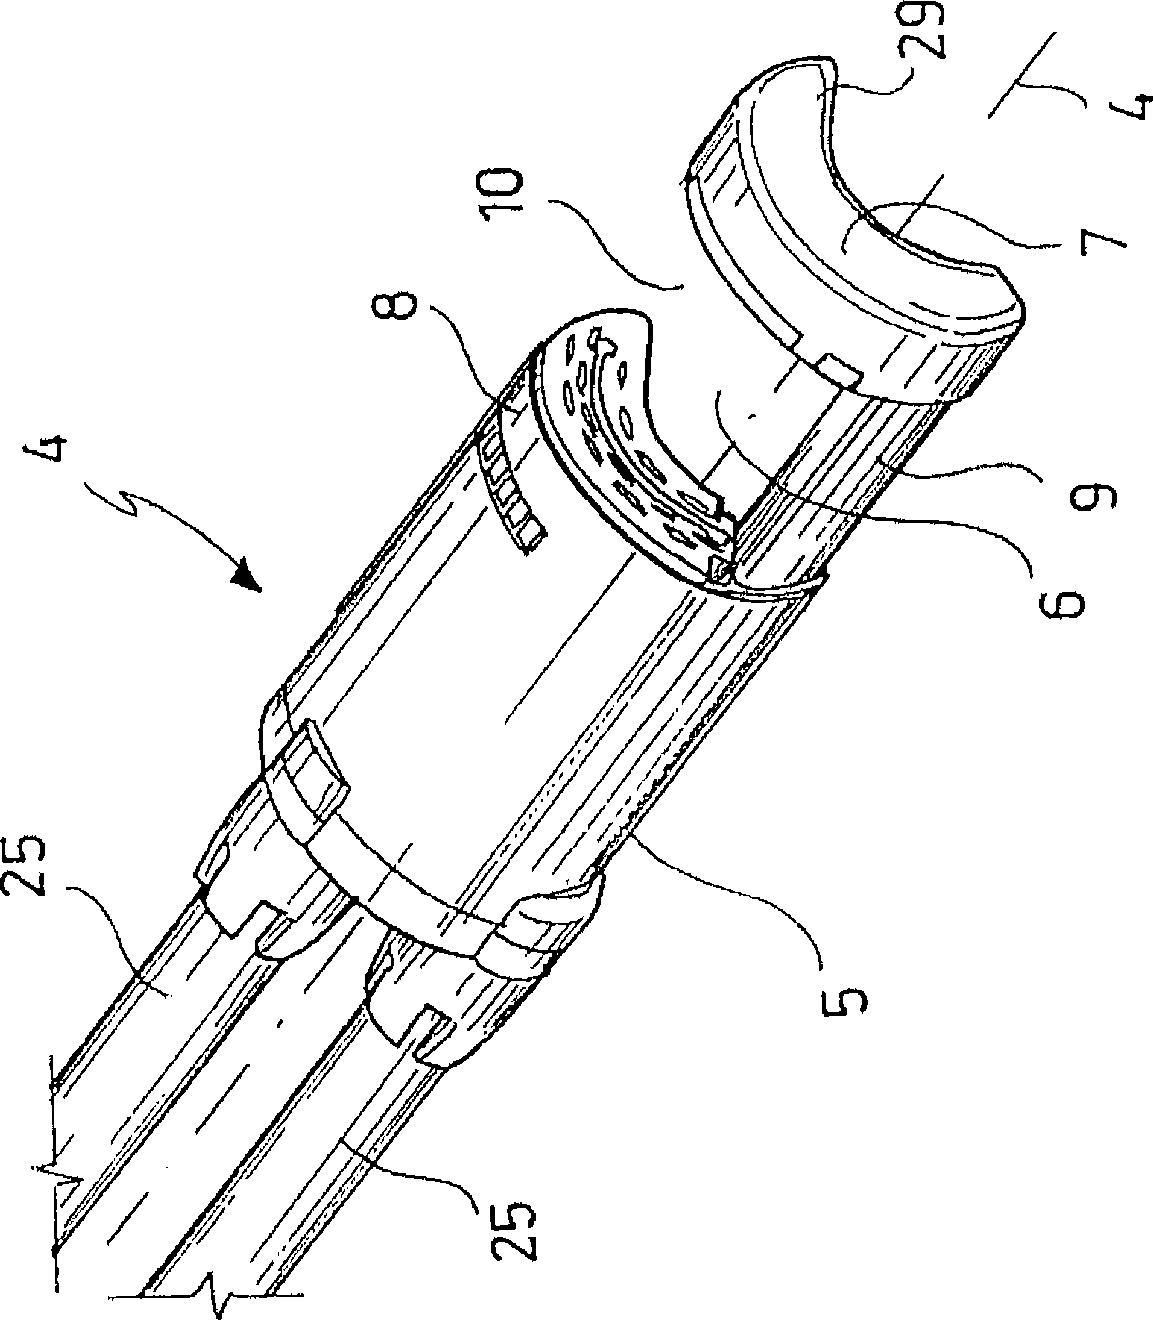 Device for endoluminally or laparoscopically grasping and excising a tissue sample from areas in a patient's body